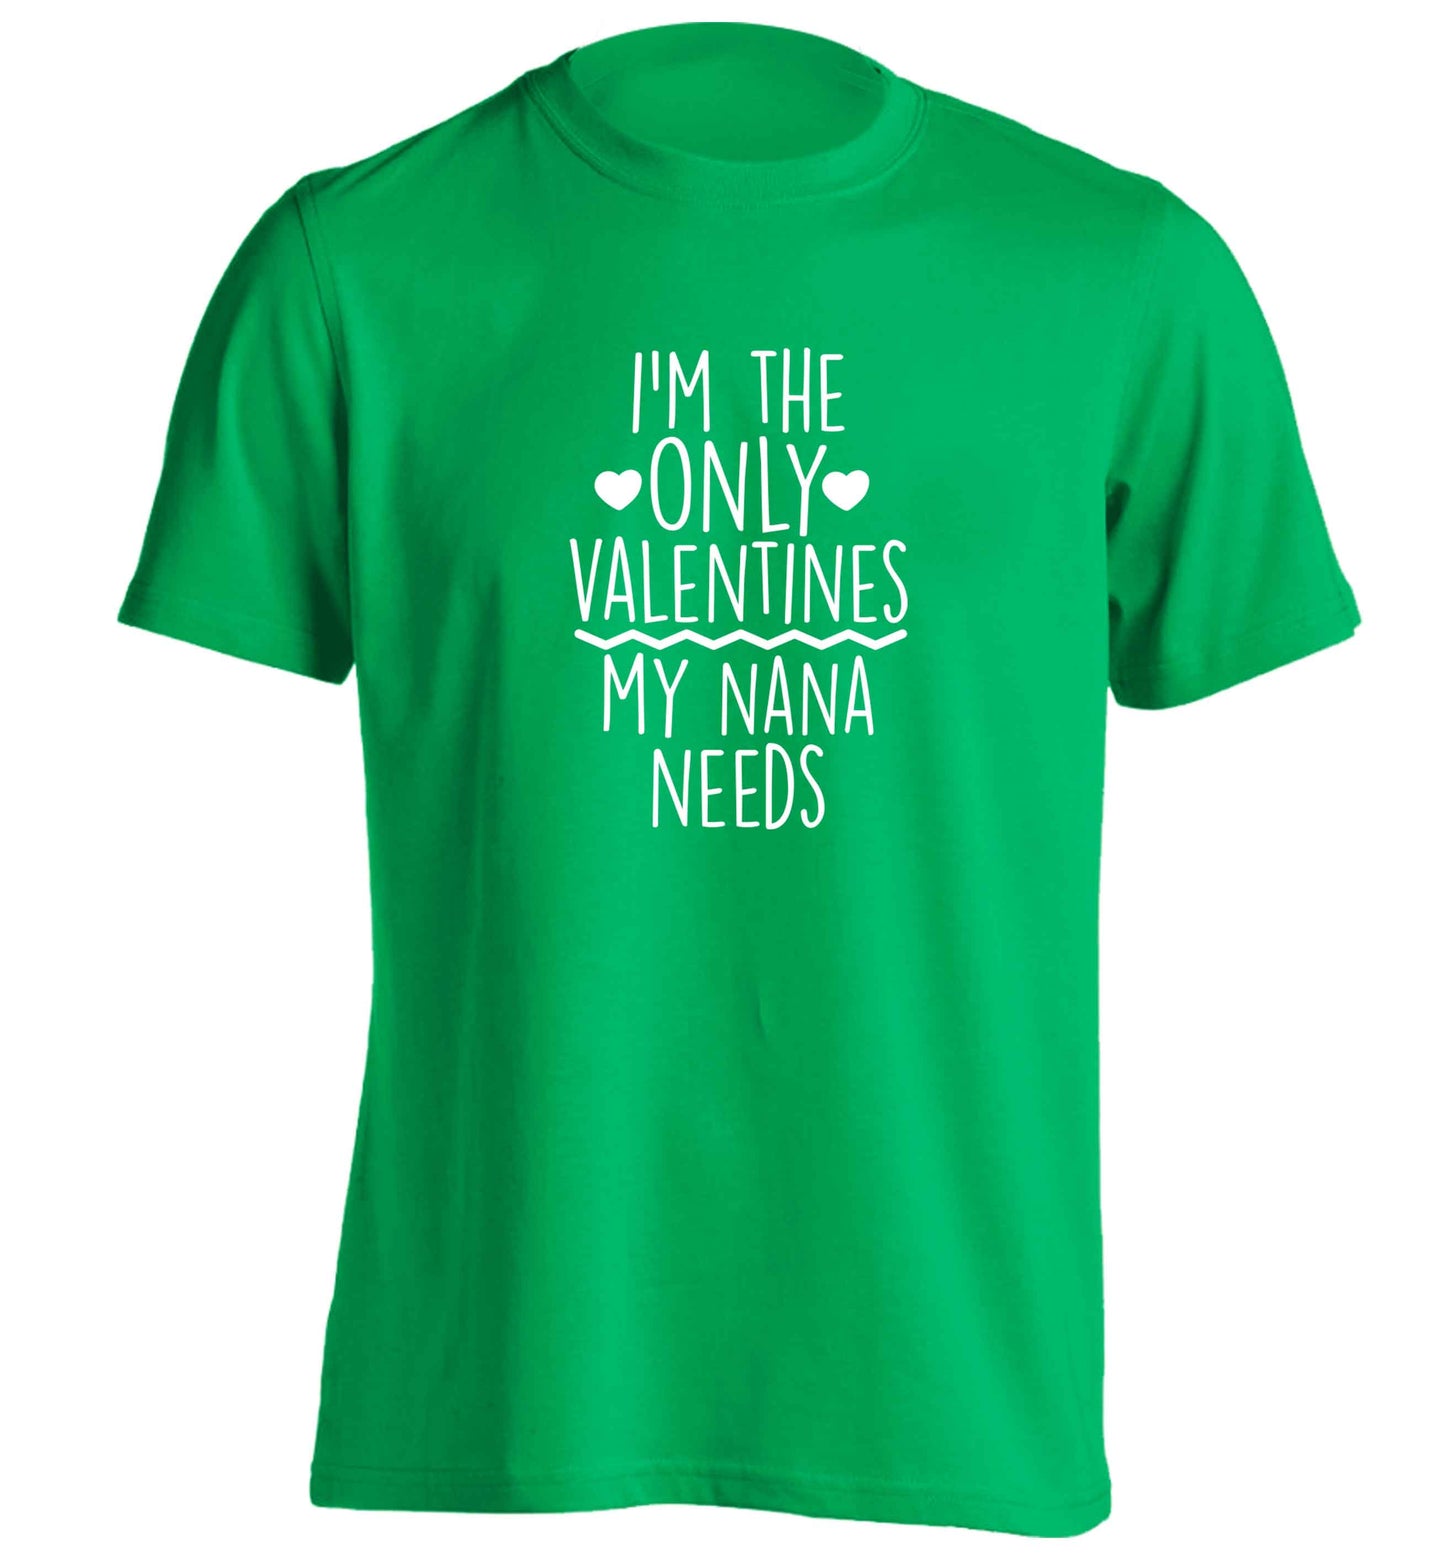 I'm the only valentines my nana needs adults unisex green Tshirt 2XL